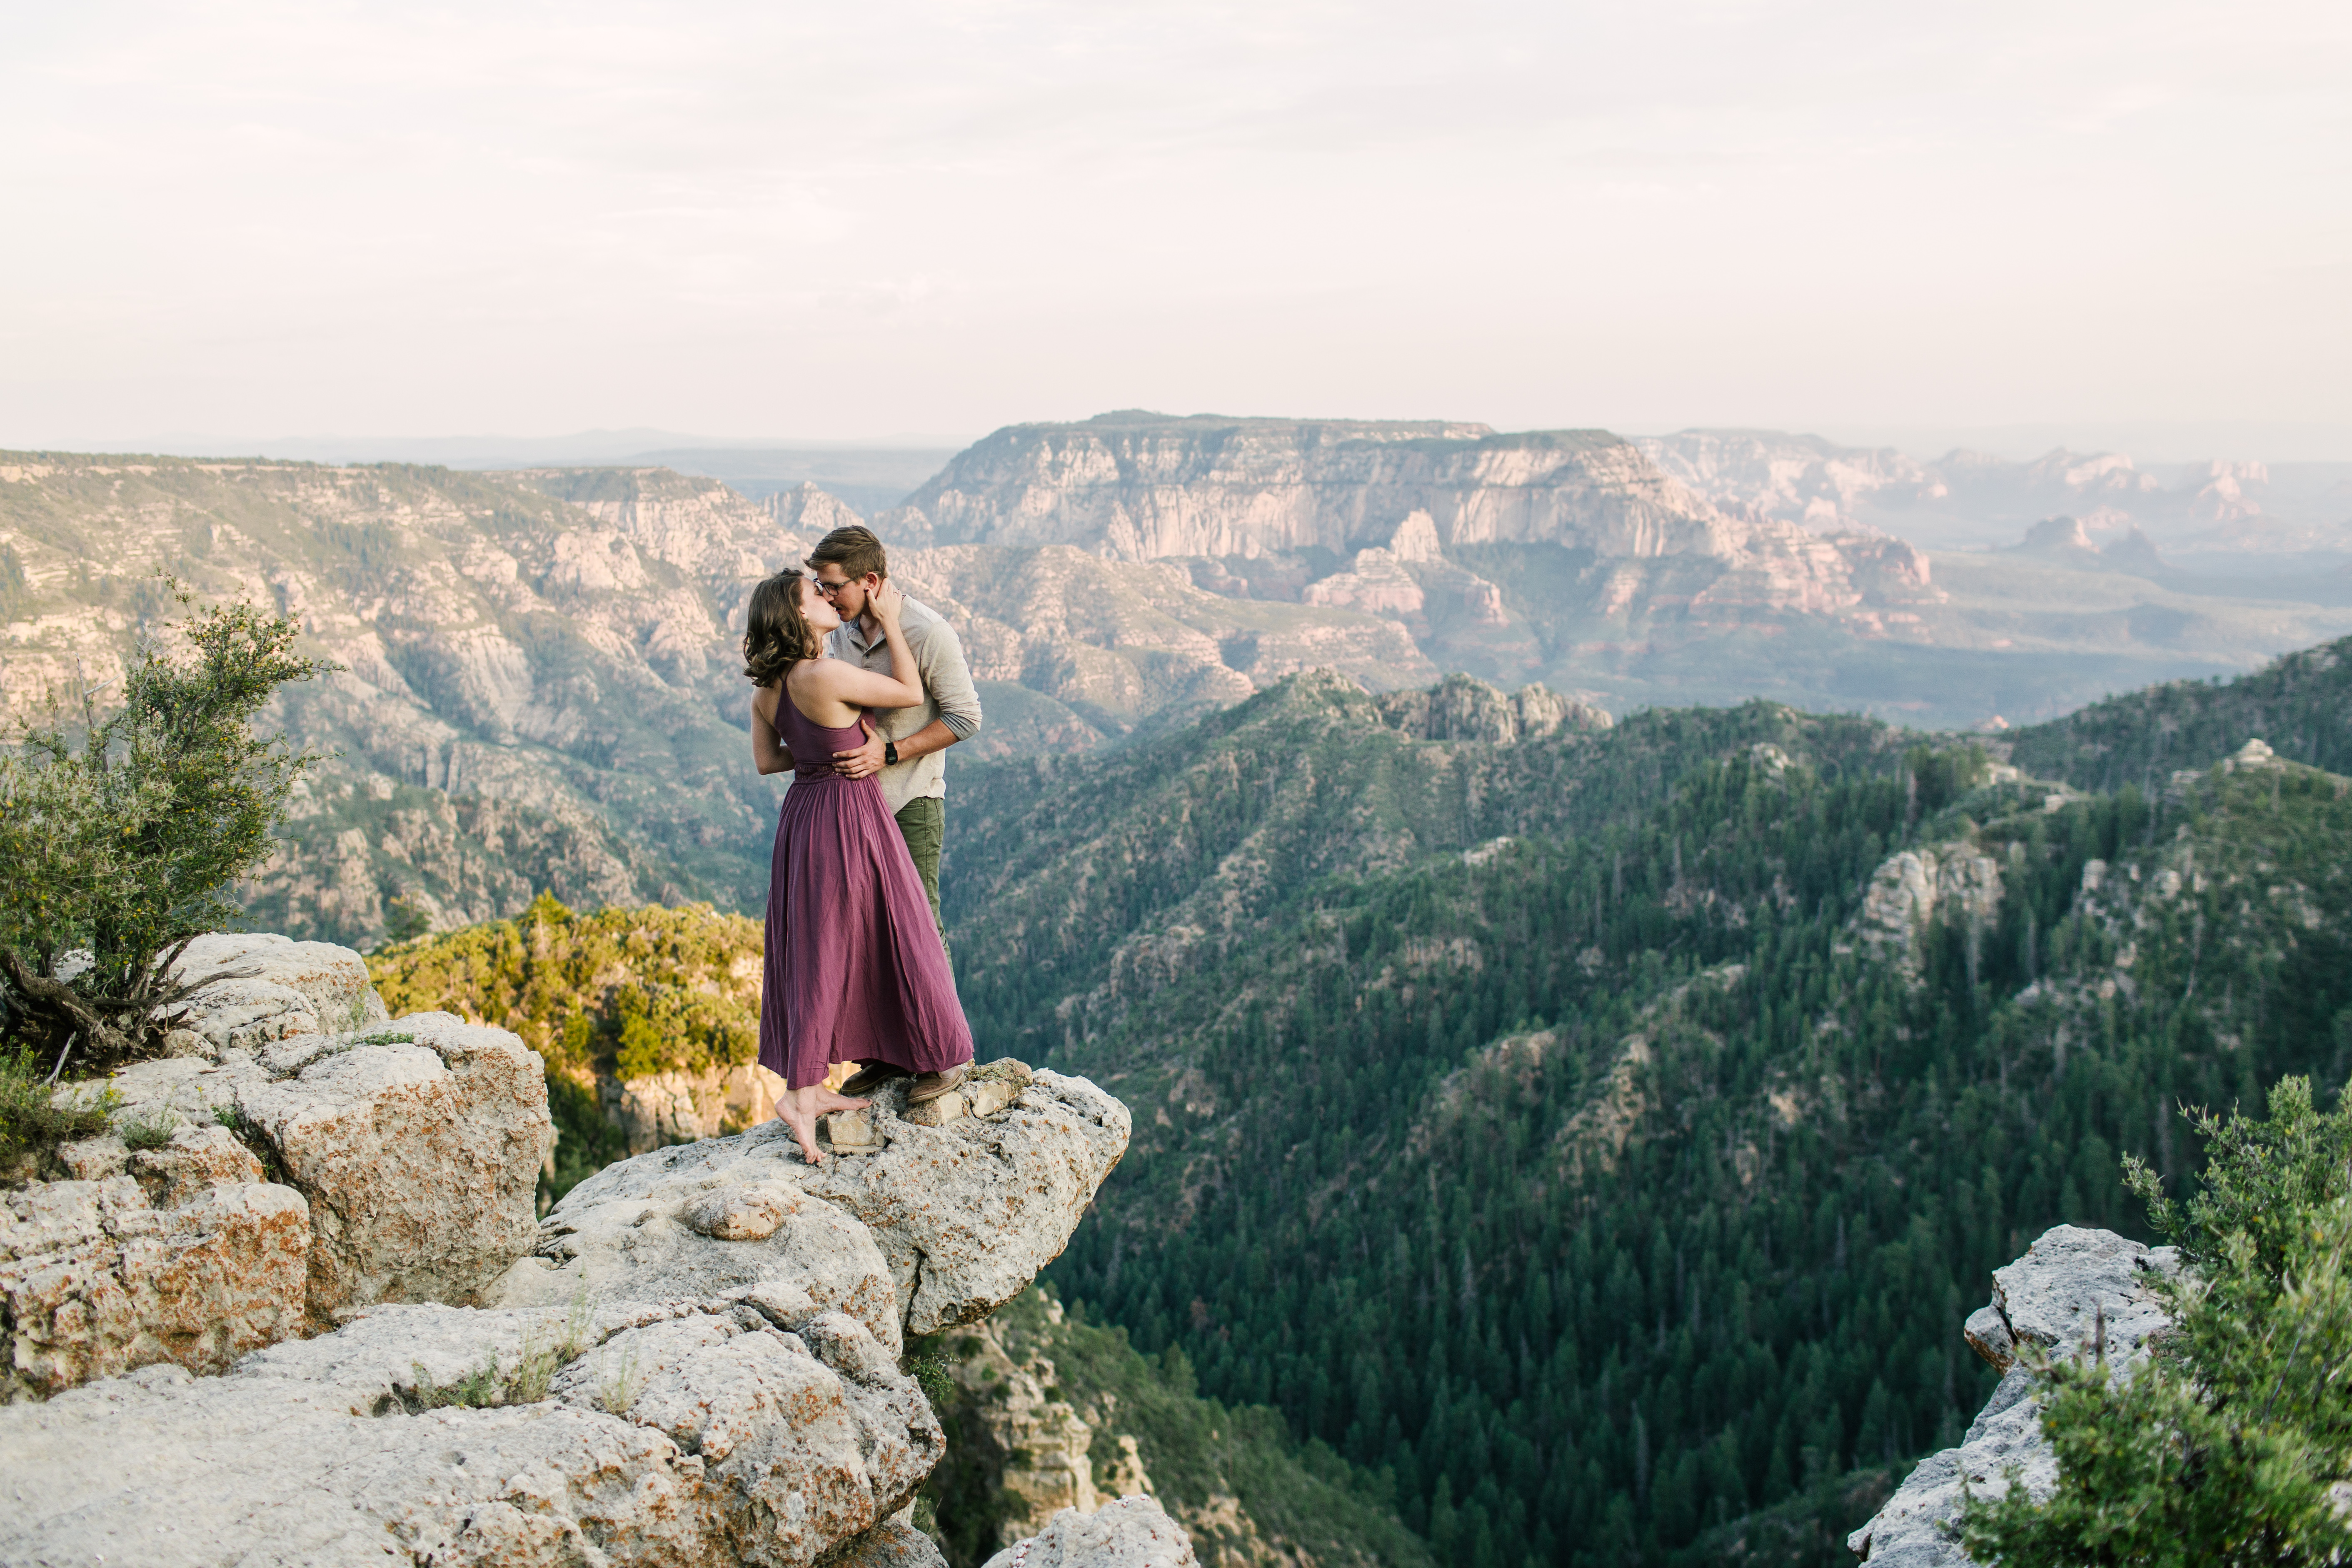 Edge Of The World Adventure Session Hailey Golich Photography Bloghailey Golich Photography Blog